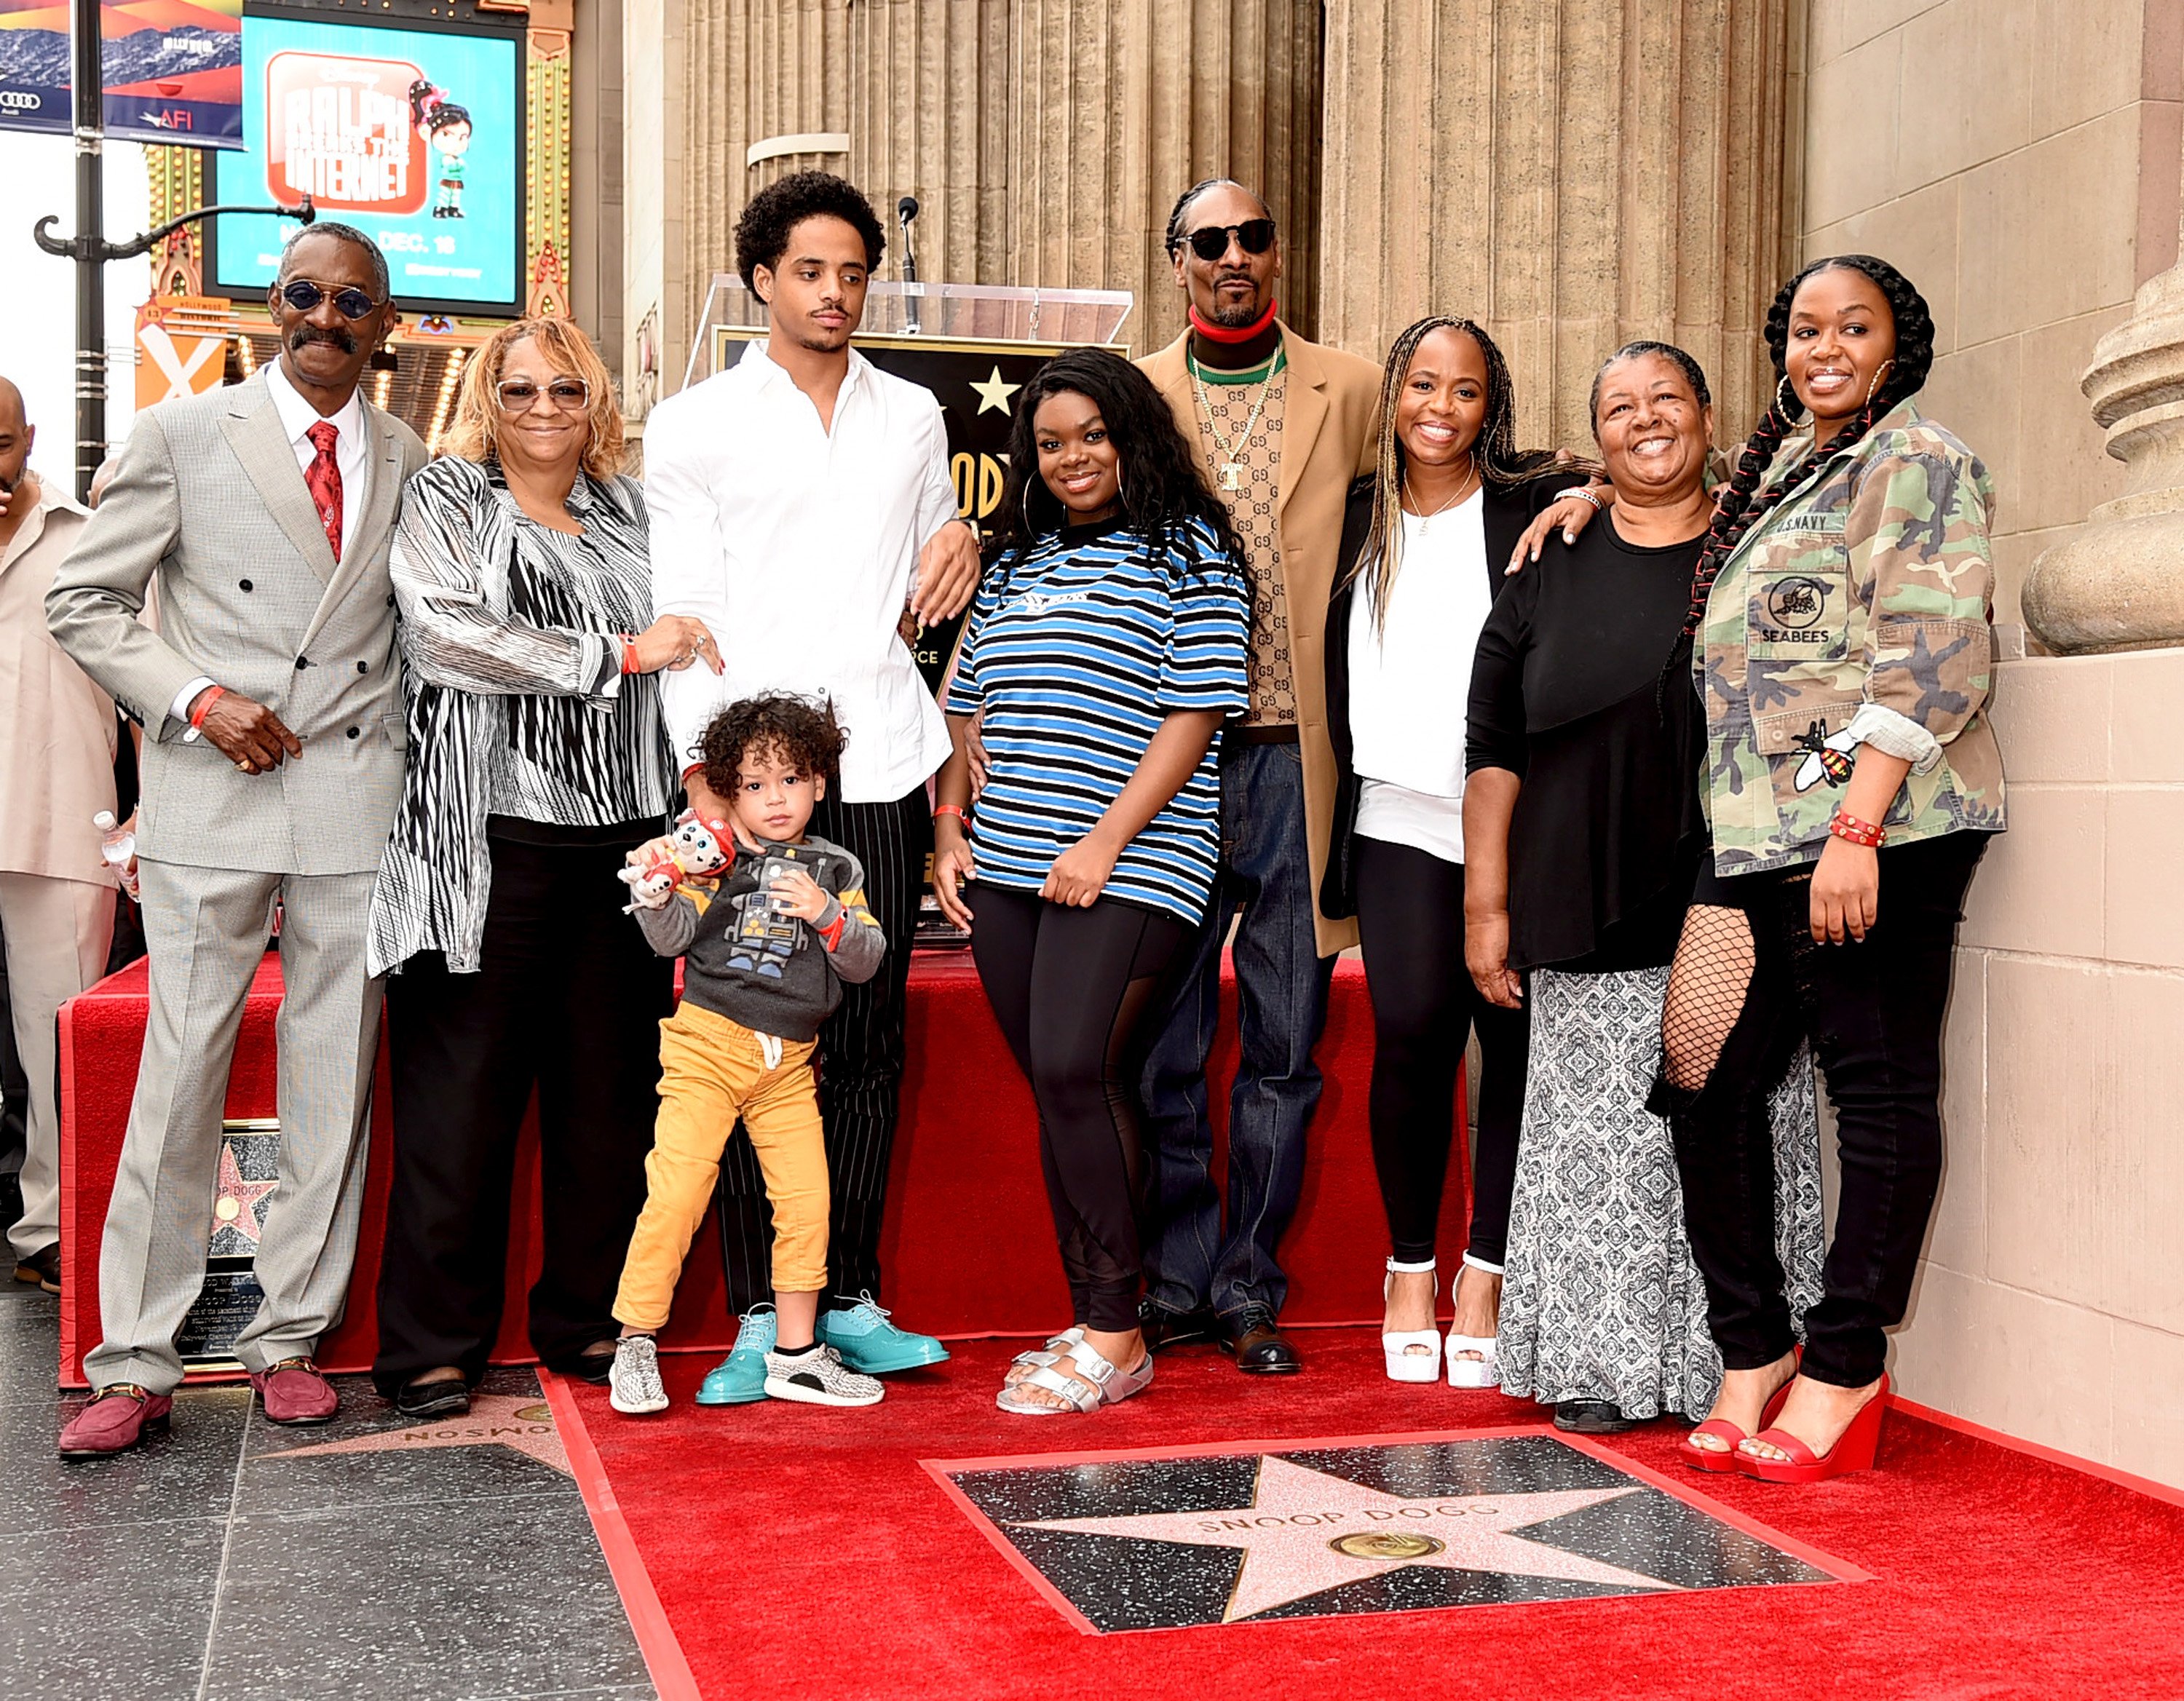 Snoop Dogg and his family at The Hollywood Walk Of Fame on Hollywood Boulevard on November 19, 2018 in Los Angeles, California. | Photo: Getty Images